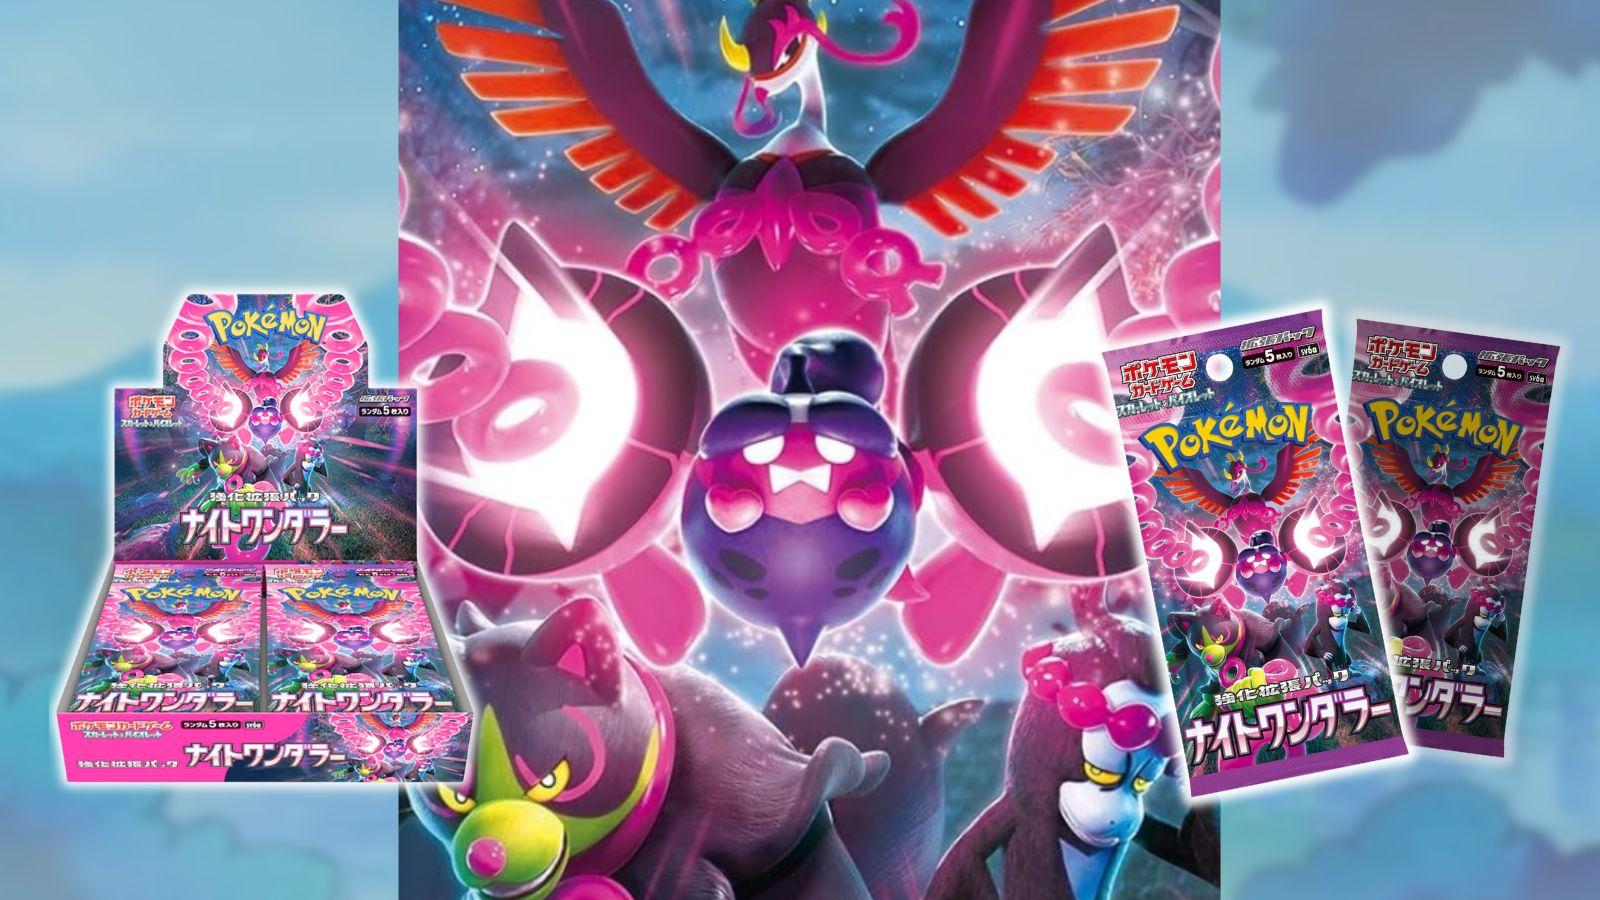 Night Wanderer Pokemon TCG artwork and products with Lavender Town background.